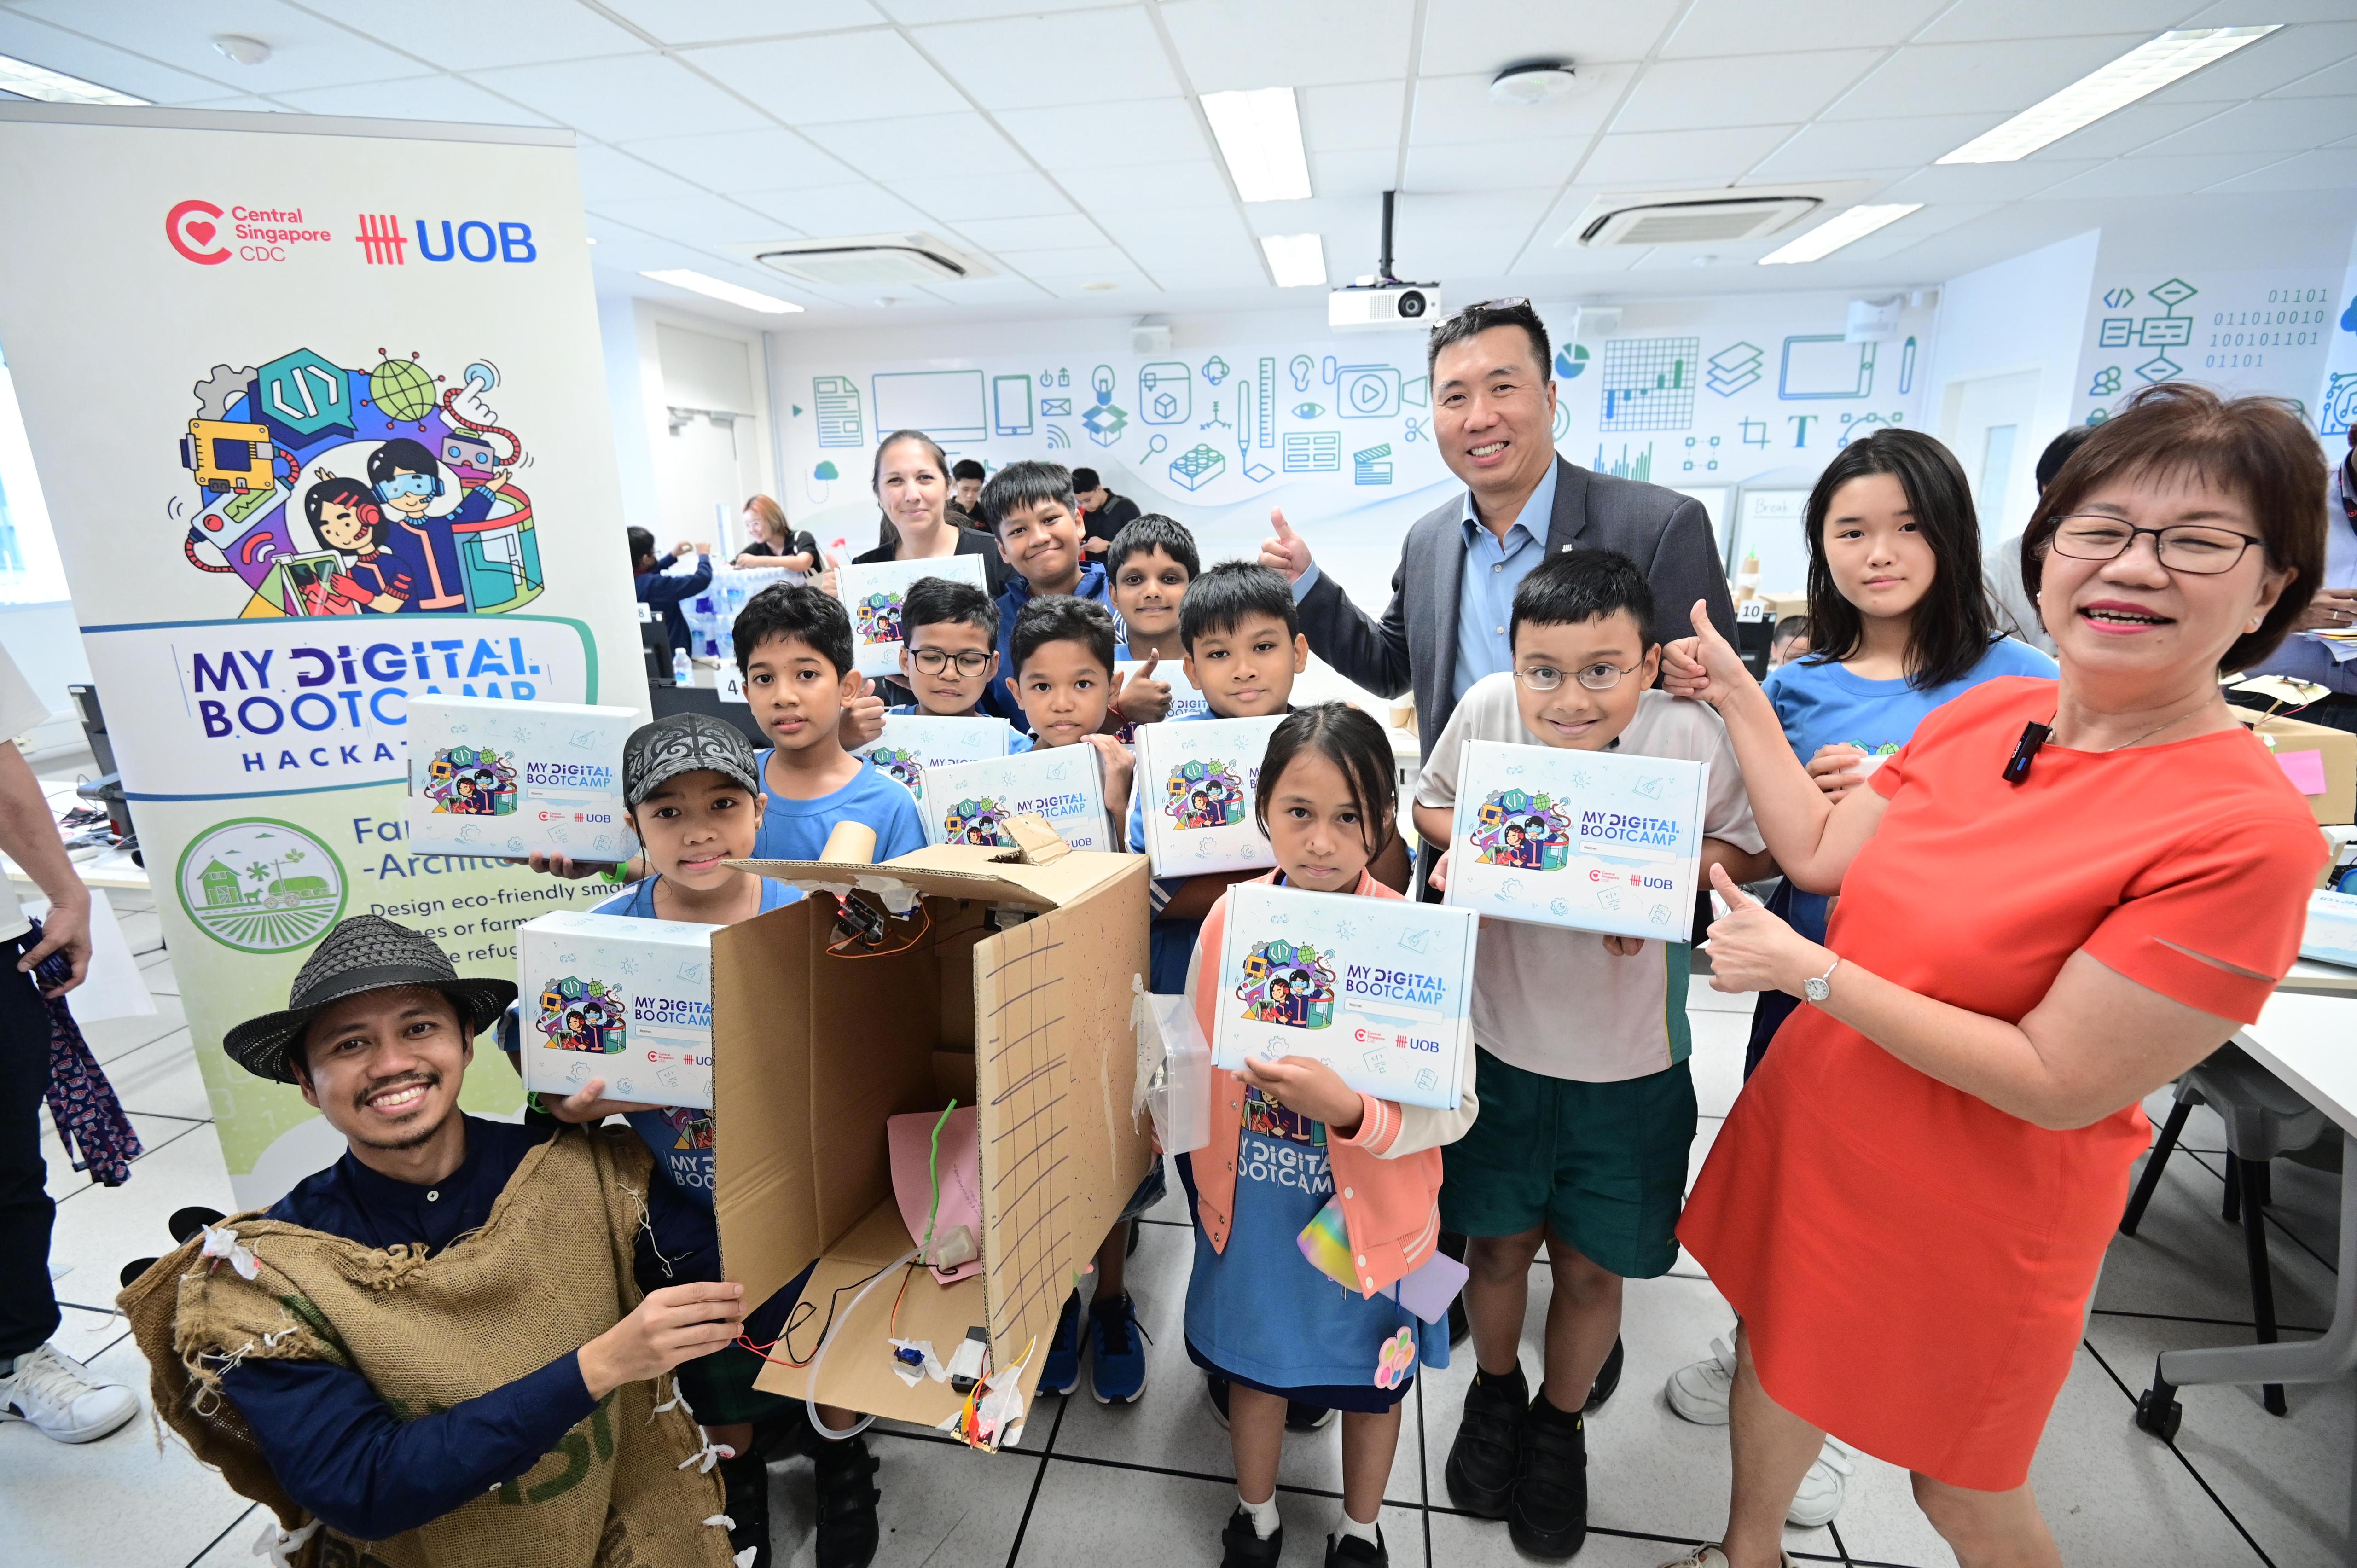 Mayor Denise Phua (extreme Right) and UOB’s Mr Leonard Tan (centre, in jacket) interact with kids at “My Digital Bootcamp”